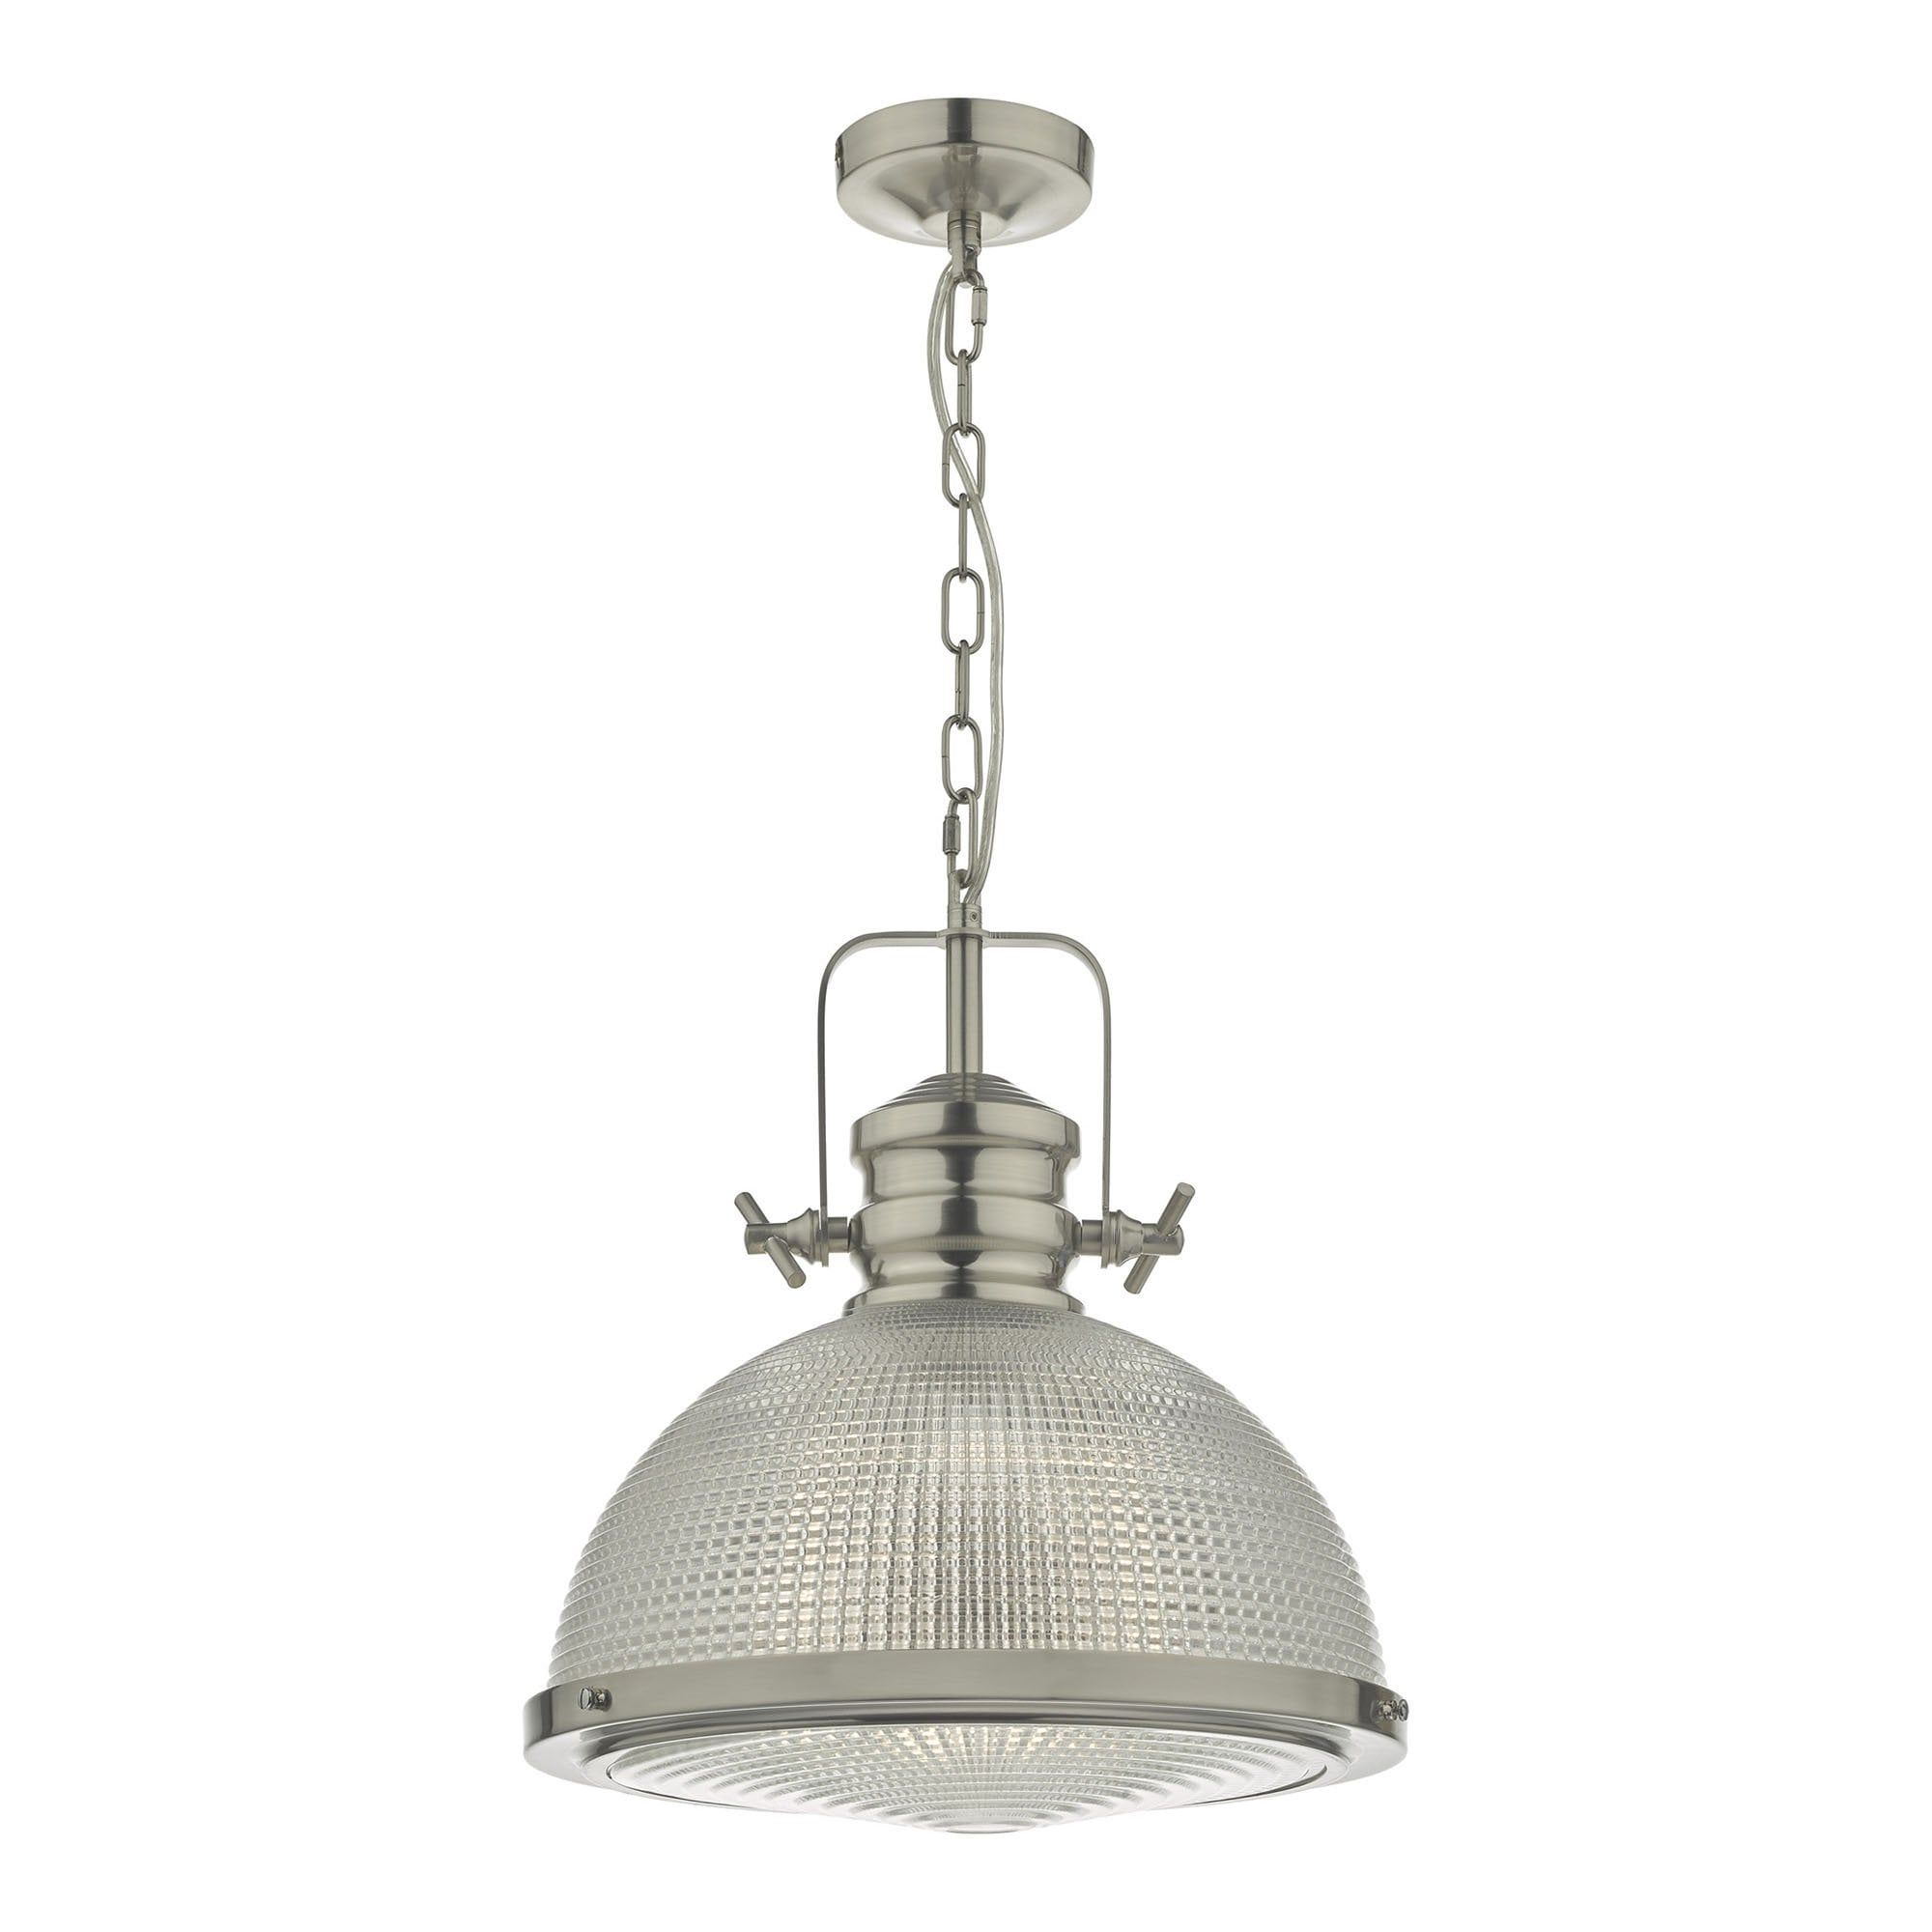 Textured Nickel Lantern Chandeliers For Well Known Industrial Ceiling Pendant Satin Nickel Textured Glass Lighting Lights (View 10 of 15)